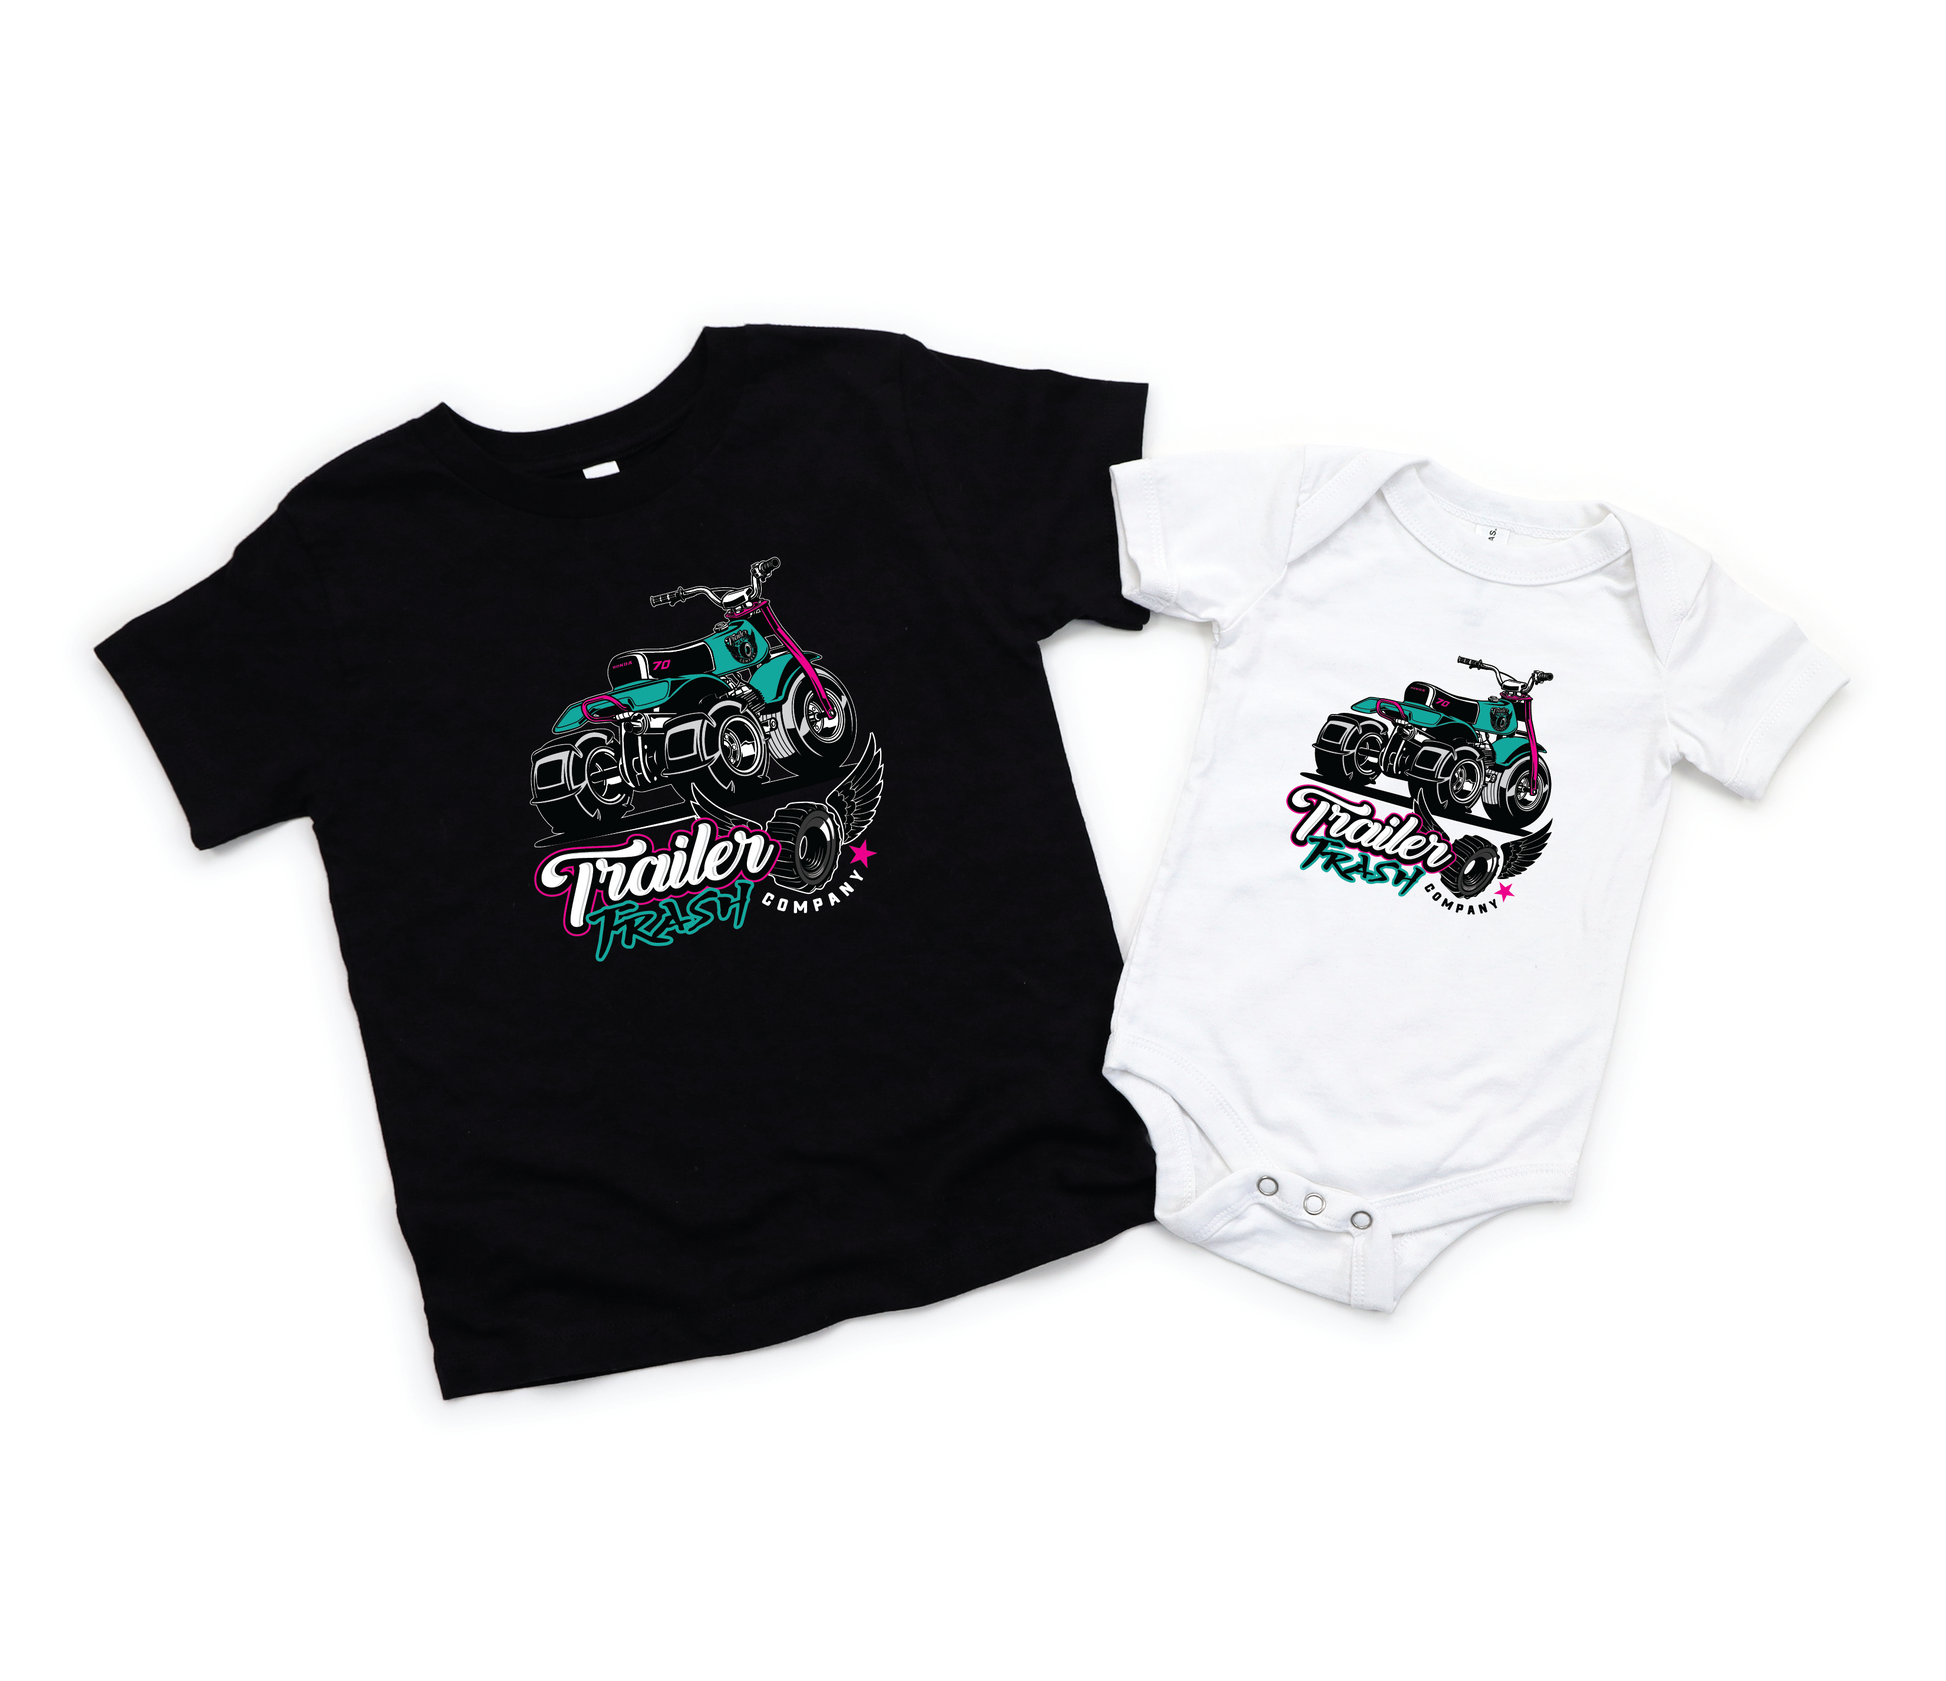 atc70 clothing for kids